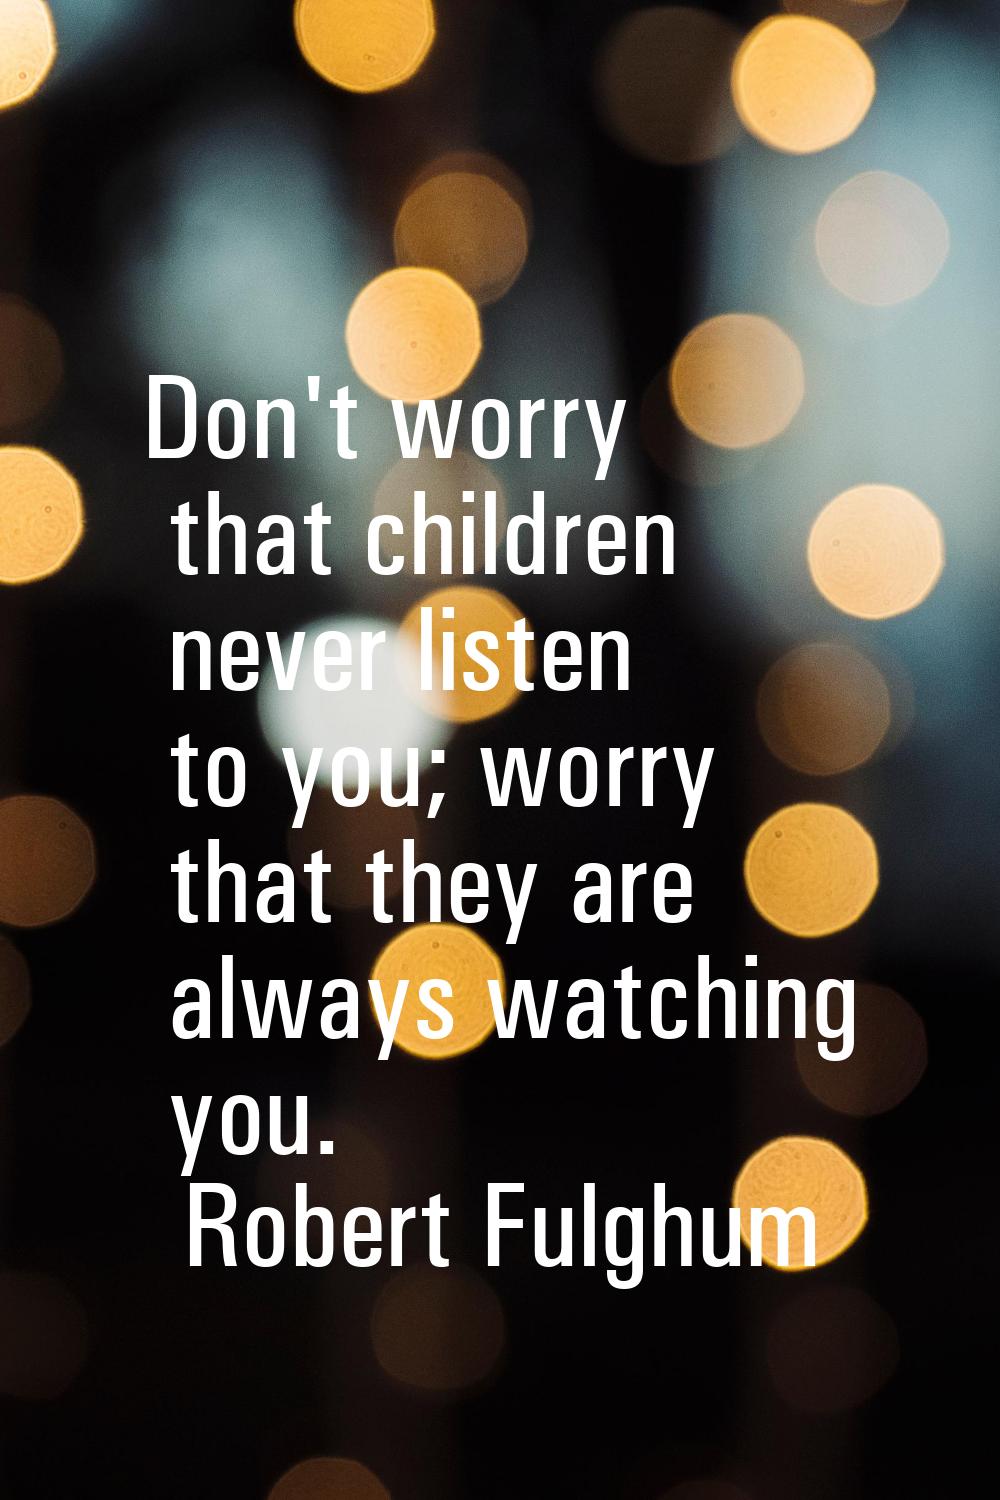 Don't worry that children never listen to you; worry that they are always watching you.